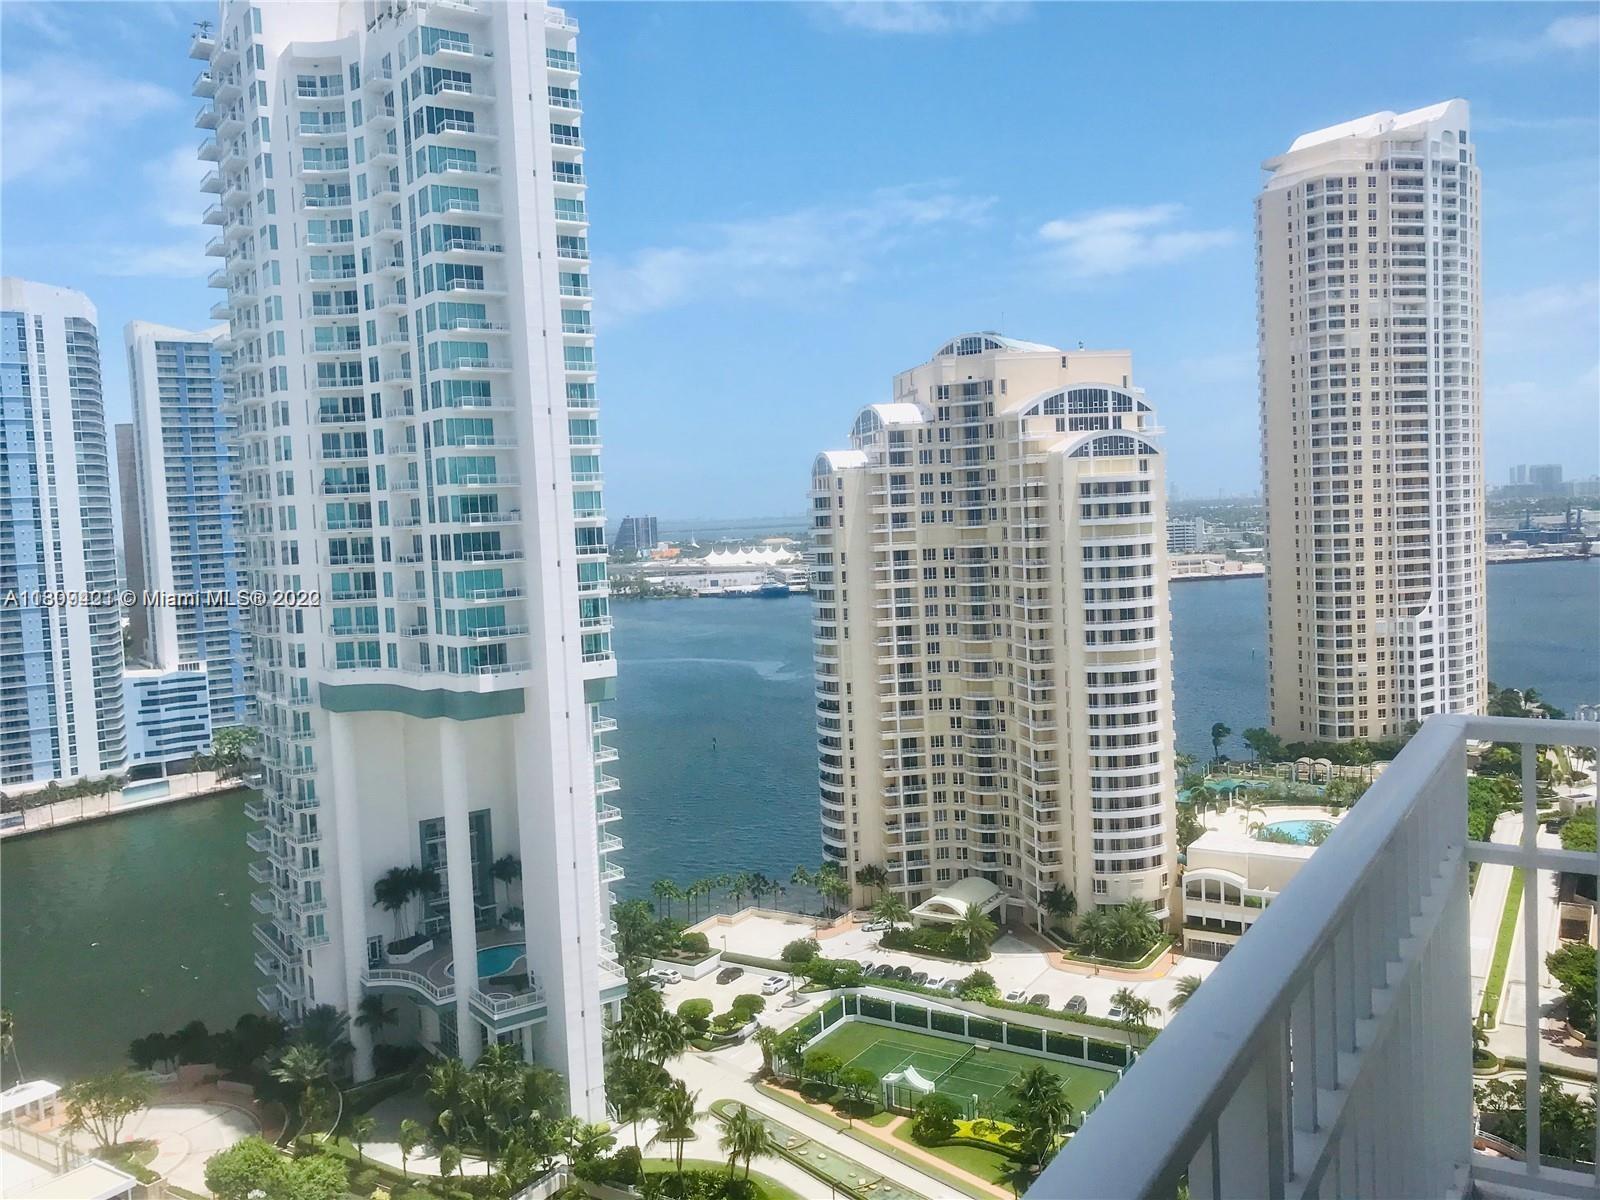 LOWER PENTHOUSE UNIT IN COURVOISIER COURTS. 1 BE 1.5 BATH. GRANITE COUNTER TOPS, TILE FLOORS IN MAIN LIVING AREA. GREAT VIEWS OF THE BAY FROM YOUR BALCONY. Condo Unit in the heart of Exclusive  Brickell Key. Walking distance to Brickell City Center, Mary Brickell Village, Best restaurants in Miami, Shopping, and the hottest area in Miami Today. Property is Rented until August 31, 2023. Excellent Opportunity for Investors looking for steady income.